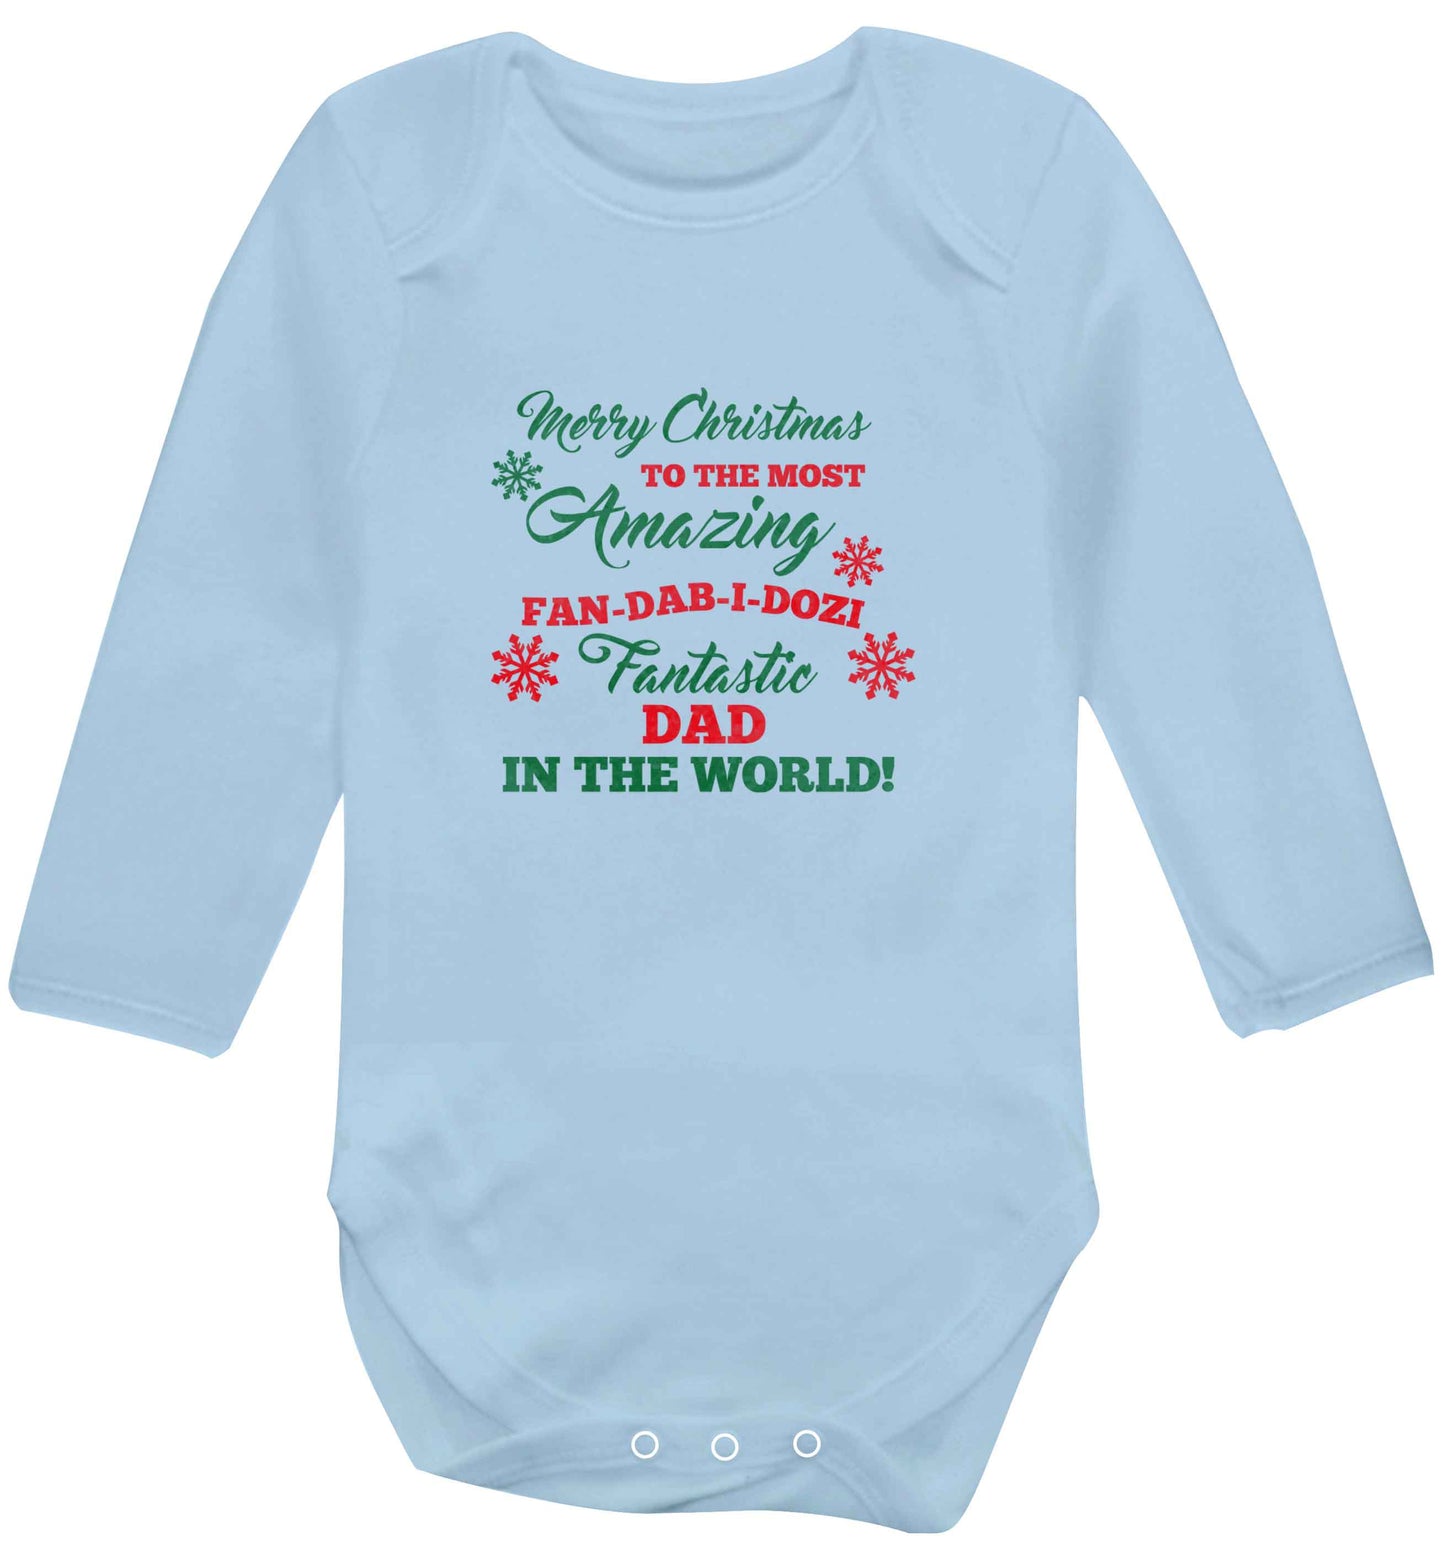 Merry Christmas to the most amazing fan-dab-i-dozi fantasic Dad in the world baby vest long sleeved pale blue 6-12 months